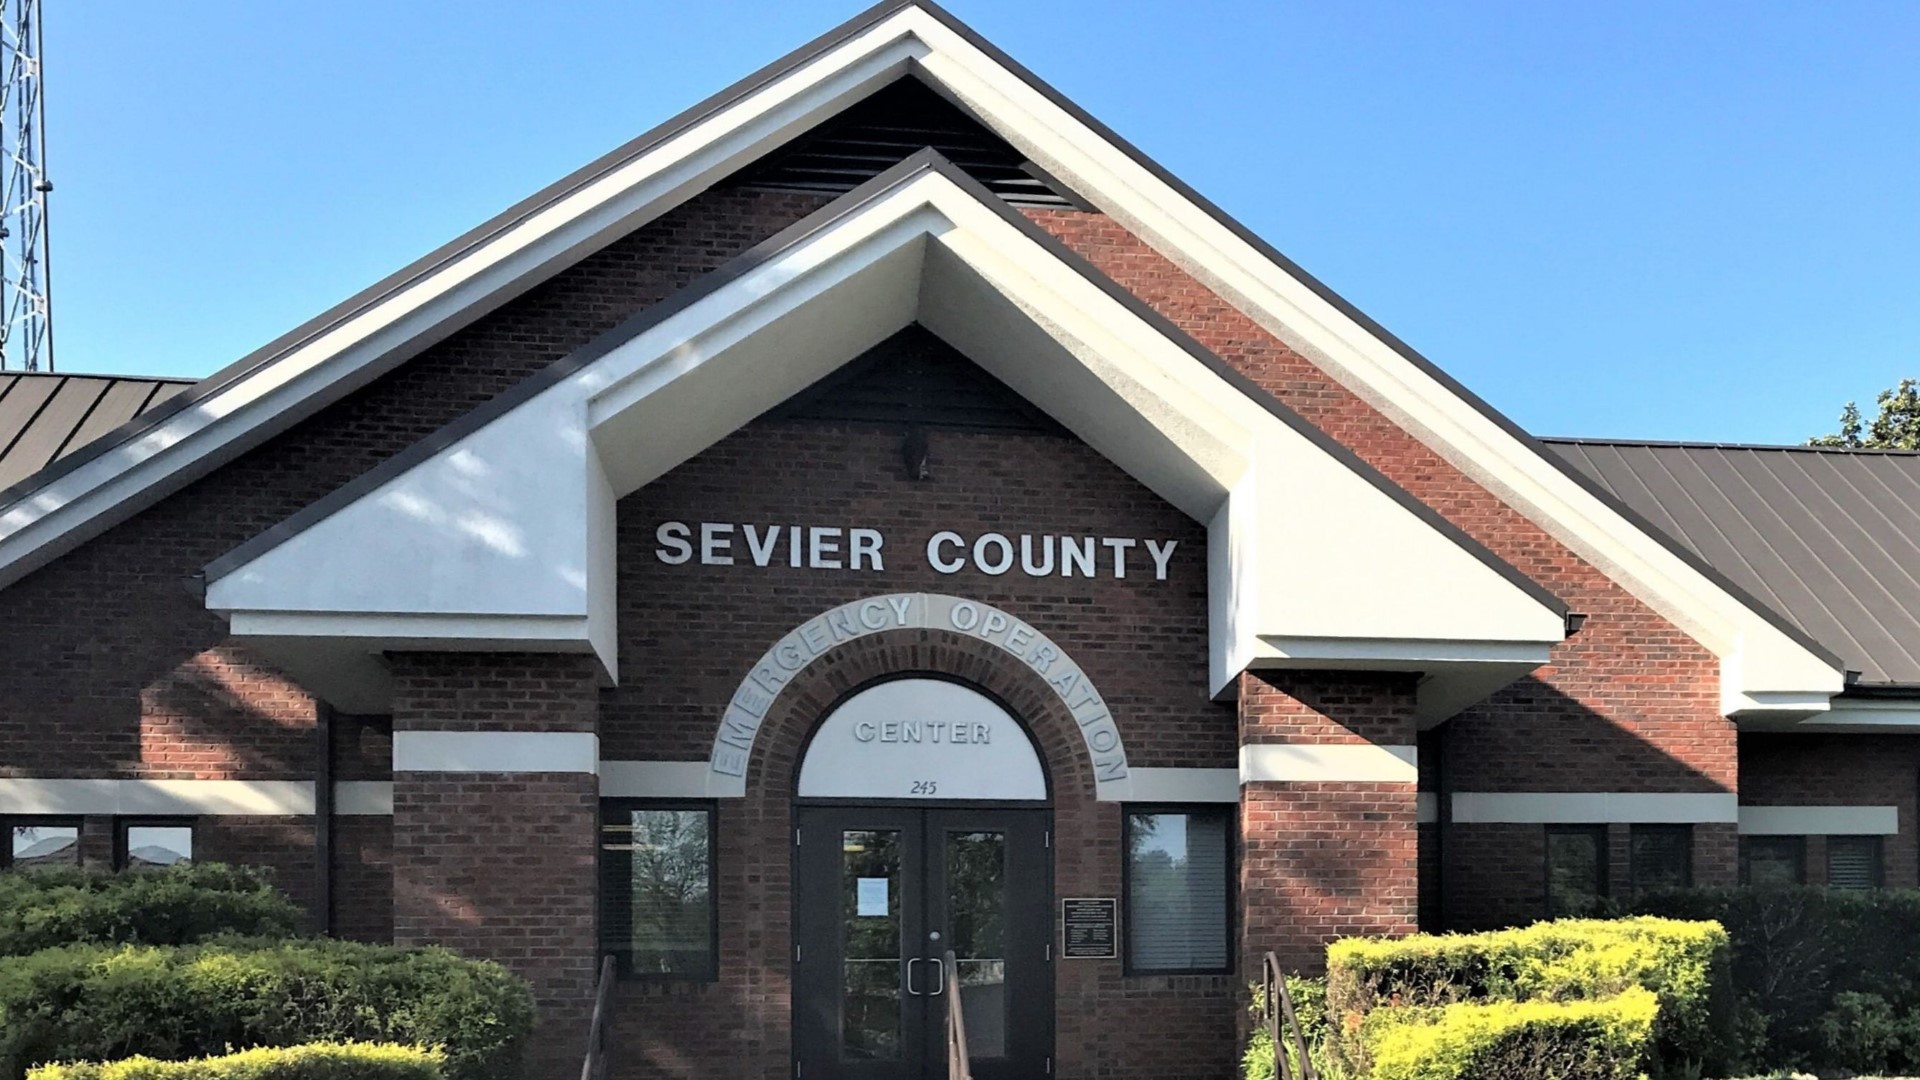 The Sevier County Central Dispatch E911 director allegedly made questionable purchases and worked on personal business during his work hours, an investigation found.